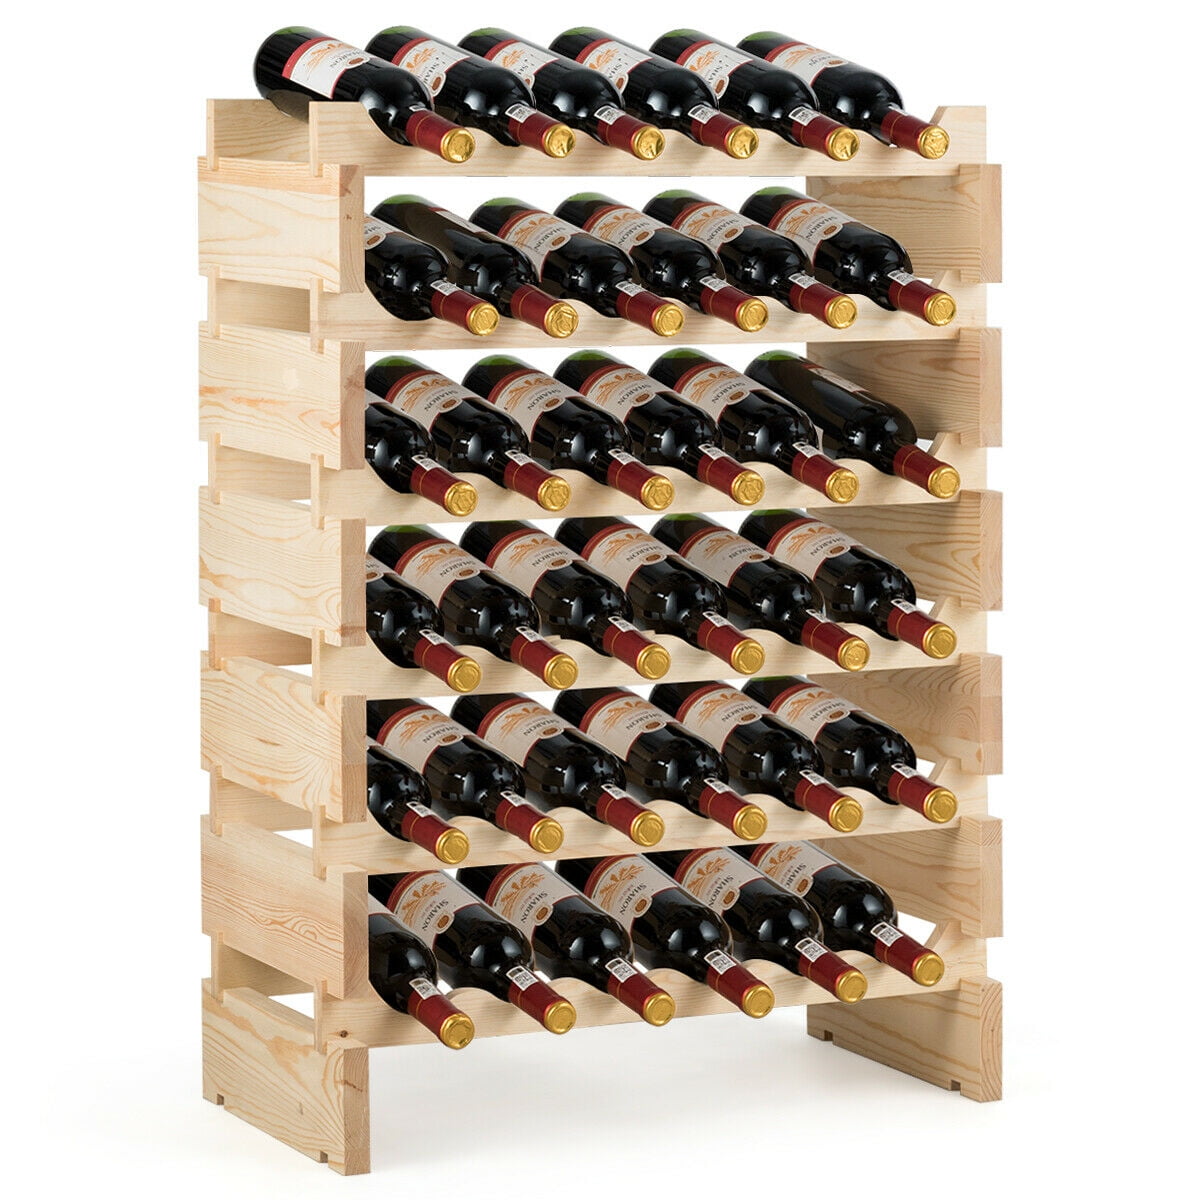 Wobble-Free Six-Tier, 36 Bottle Capacity Smartxchoices 36 Bottle Stackable Modular Wine Rack Small Wine Storage Rack Free Standing Solid Natural Wood Wine Holder Display Shelves